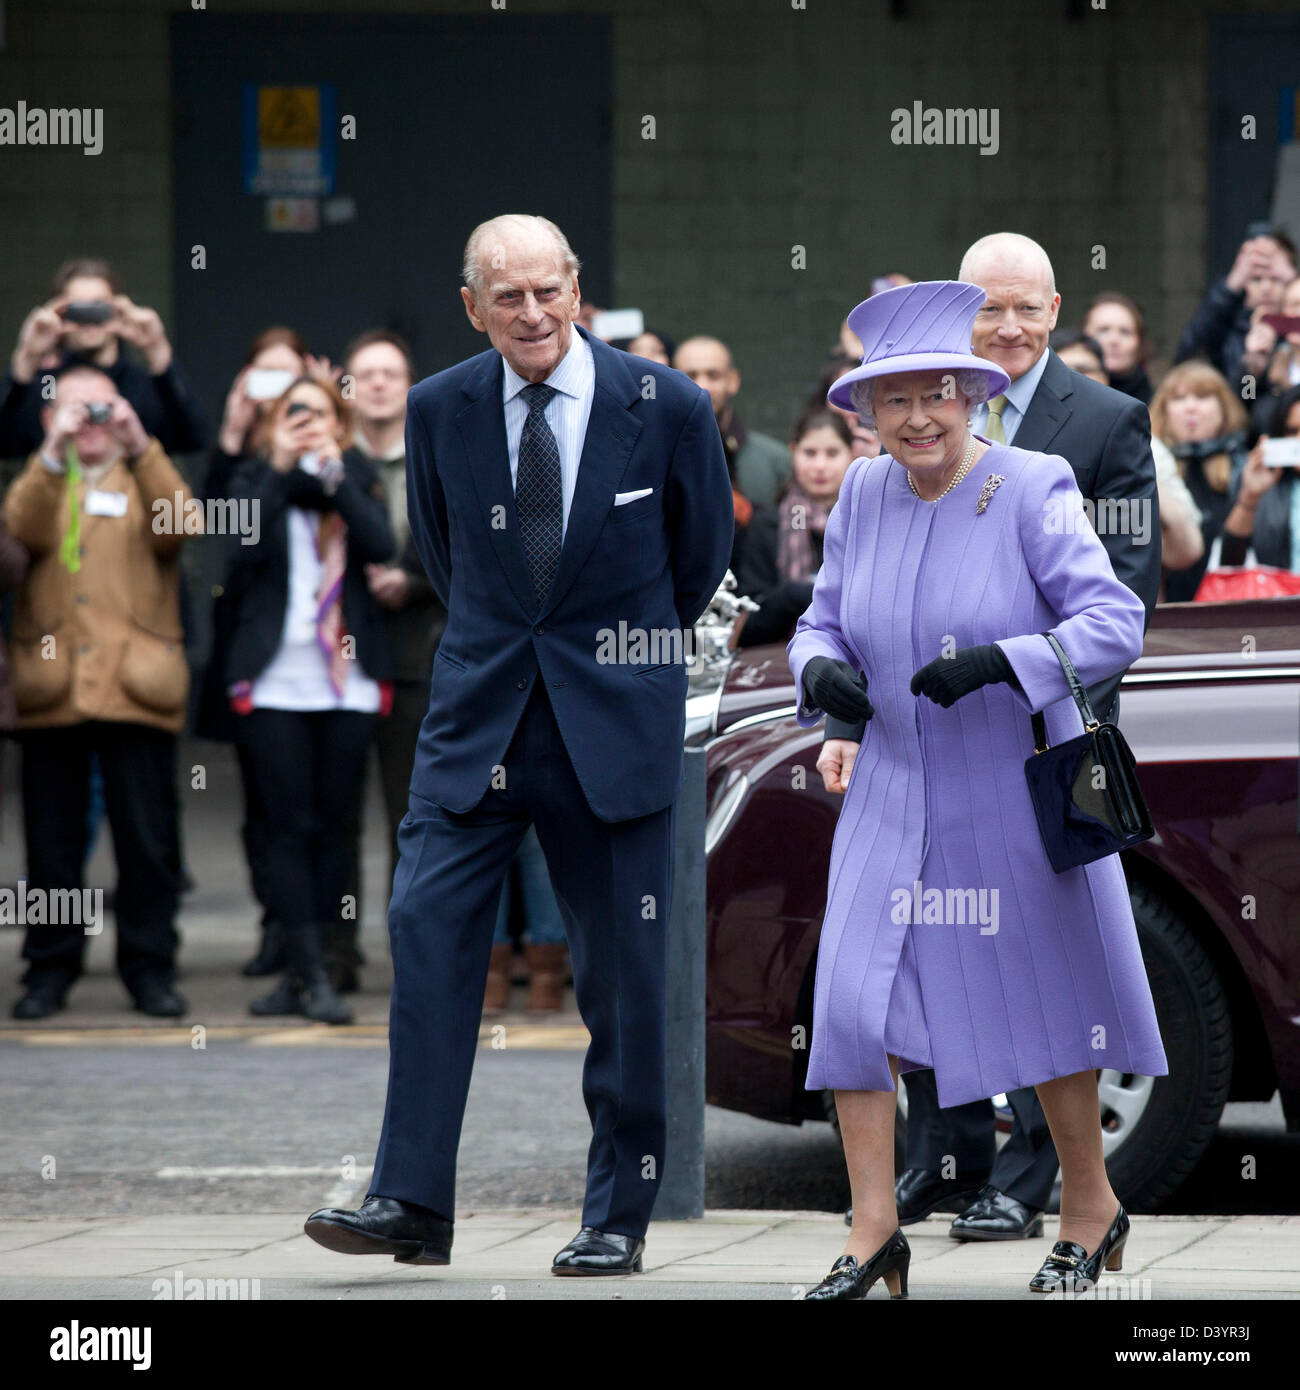 London, UK. Wednesday 27th February 2013. Her Royal Majesty Queen Elizabeth II and The Duke of Edinborough visit the new National Centre for Bowel Research and Surgical Innovation in London, UK. Credit: Michael Kemp/ Alamy Live News Stock Photo